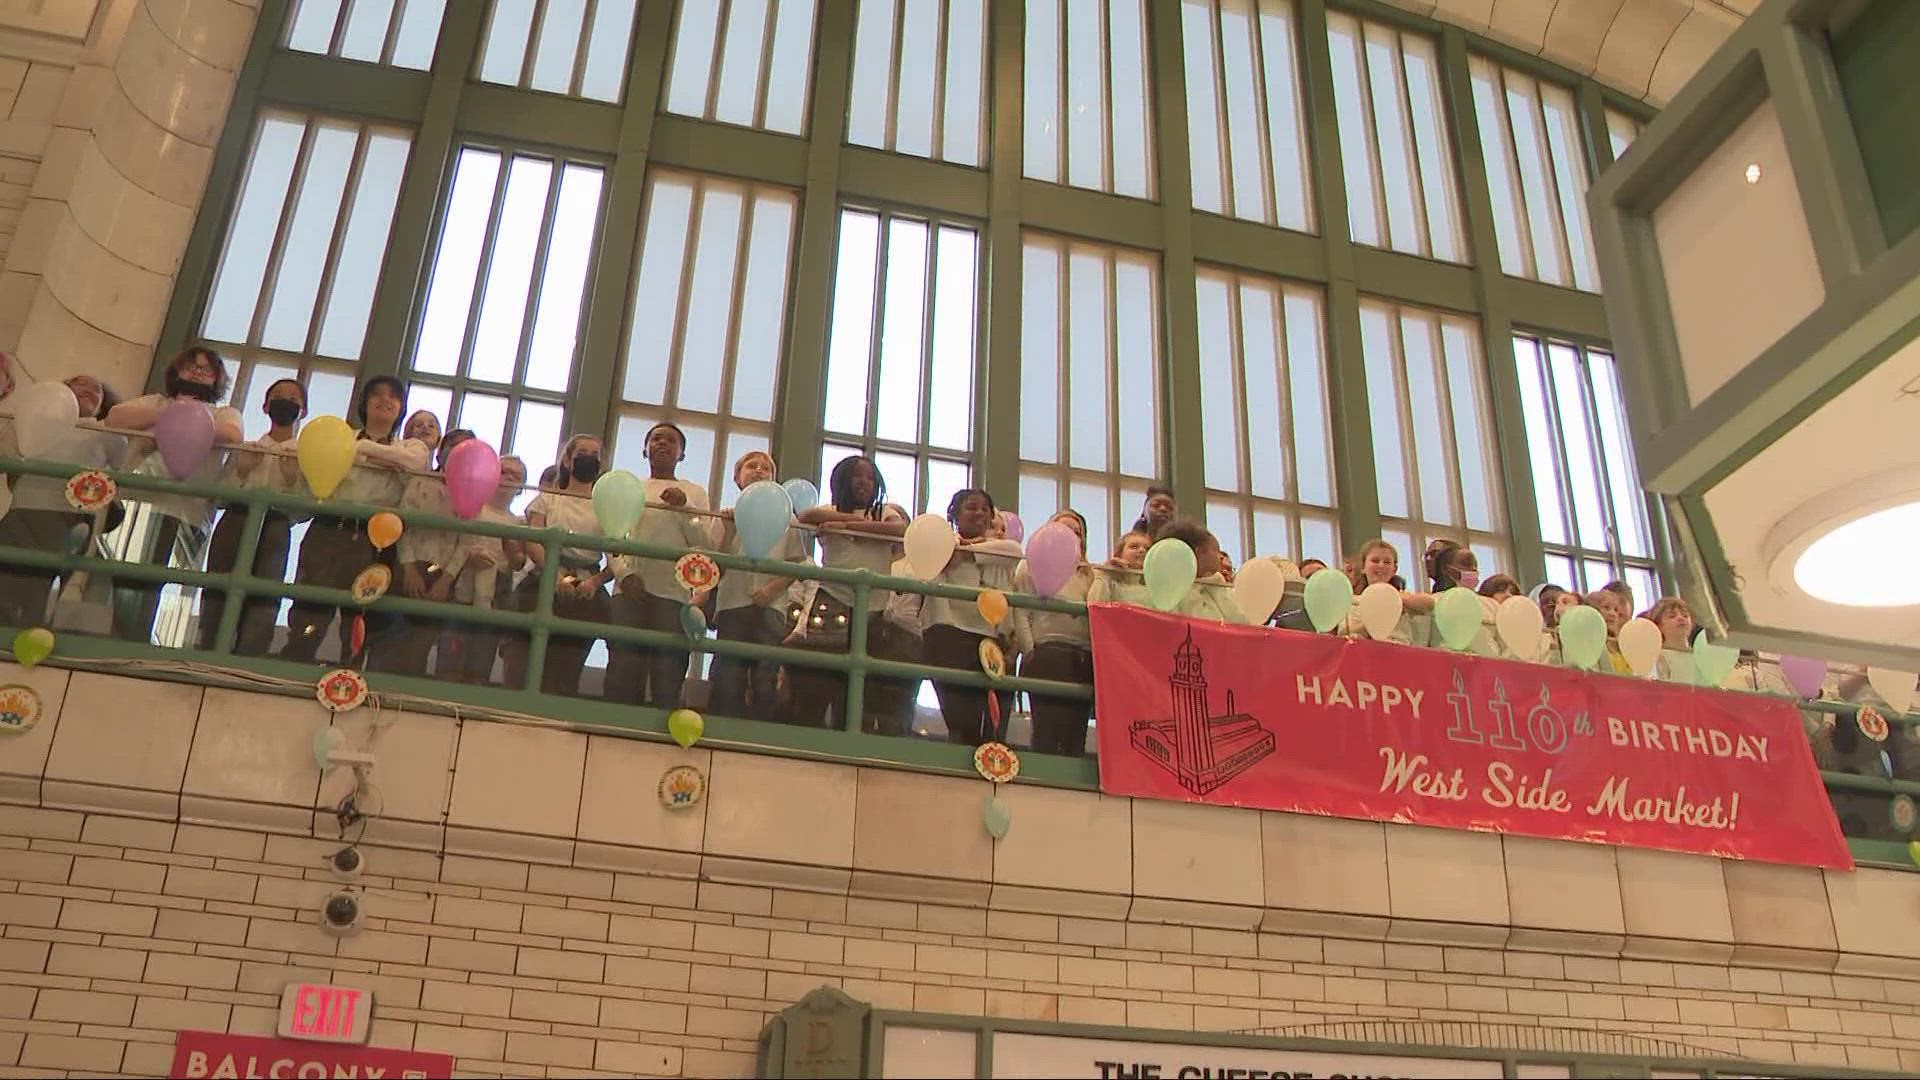 City leaders came together for the West Side Market's 110th birthday celebration on Wednesday.